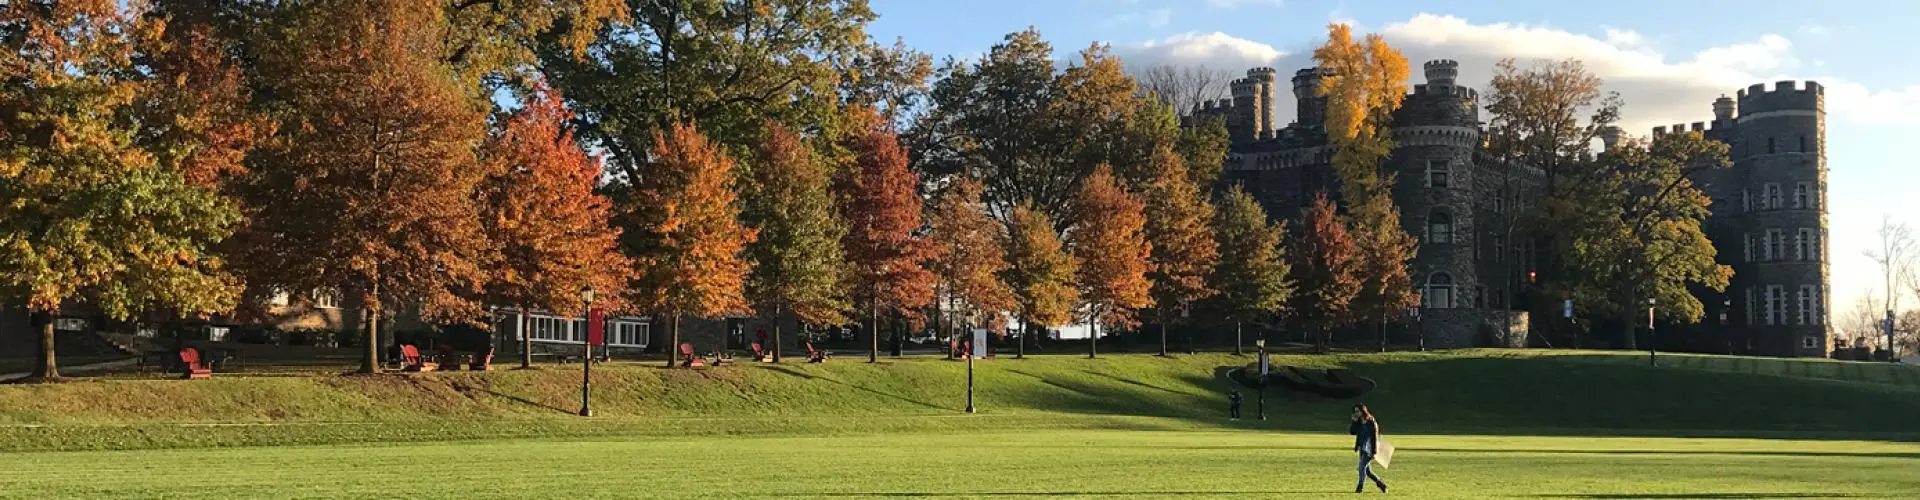 View of Grey Towers Castle, Haber Green, and the Alumni Walk during the fall.